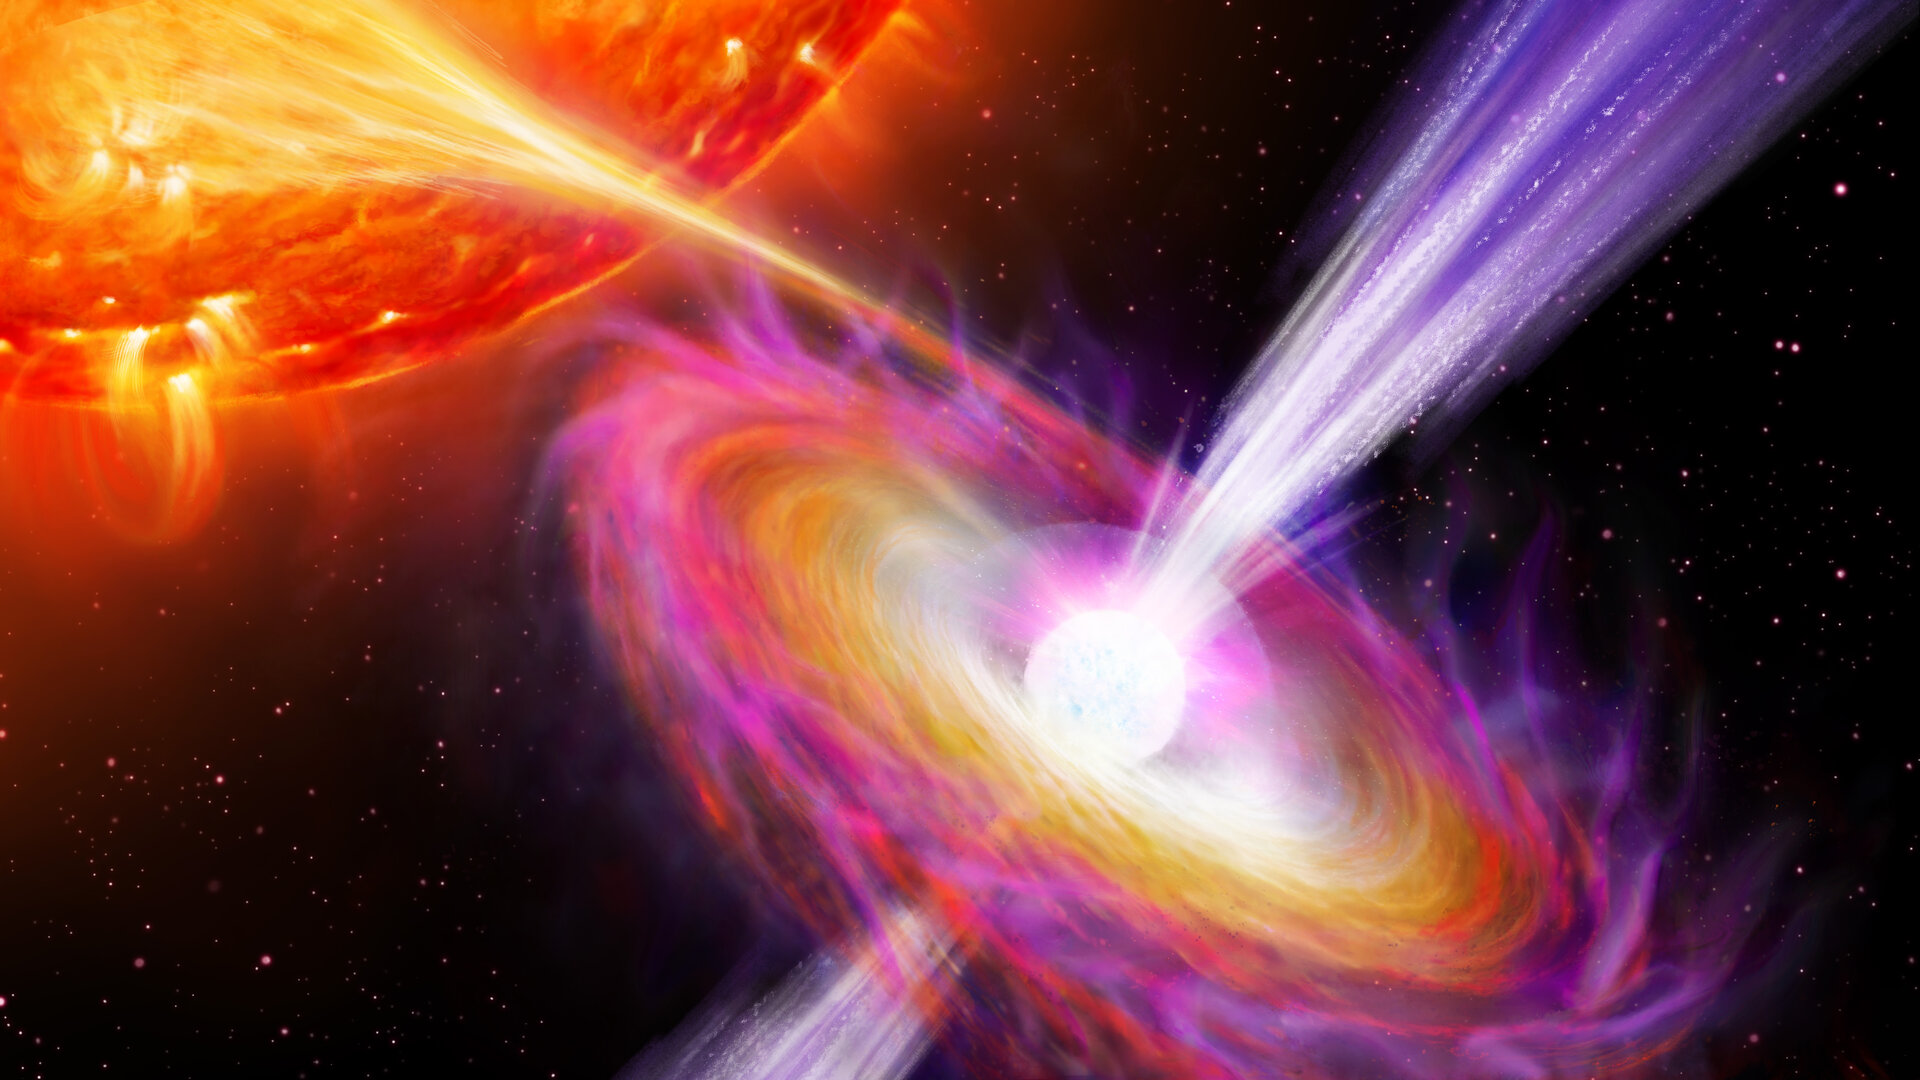 Nuclear explosions on a neutron star feed its jets 